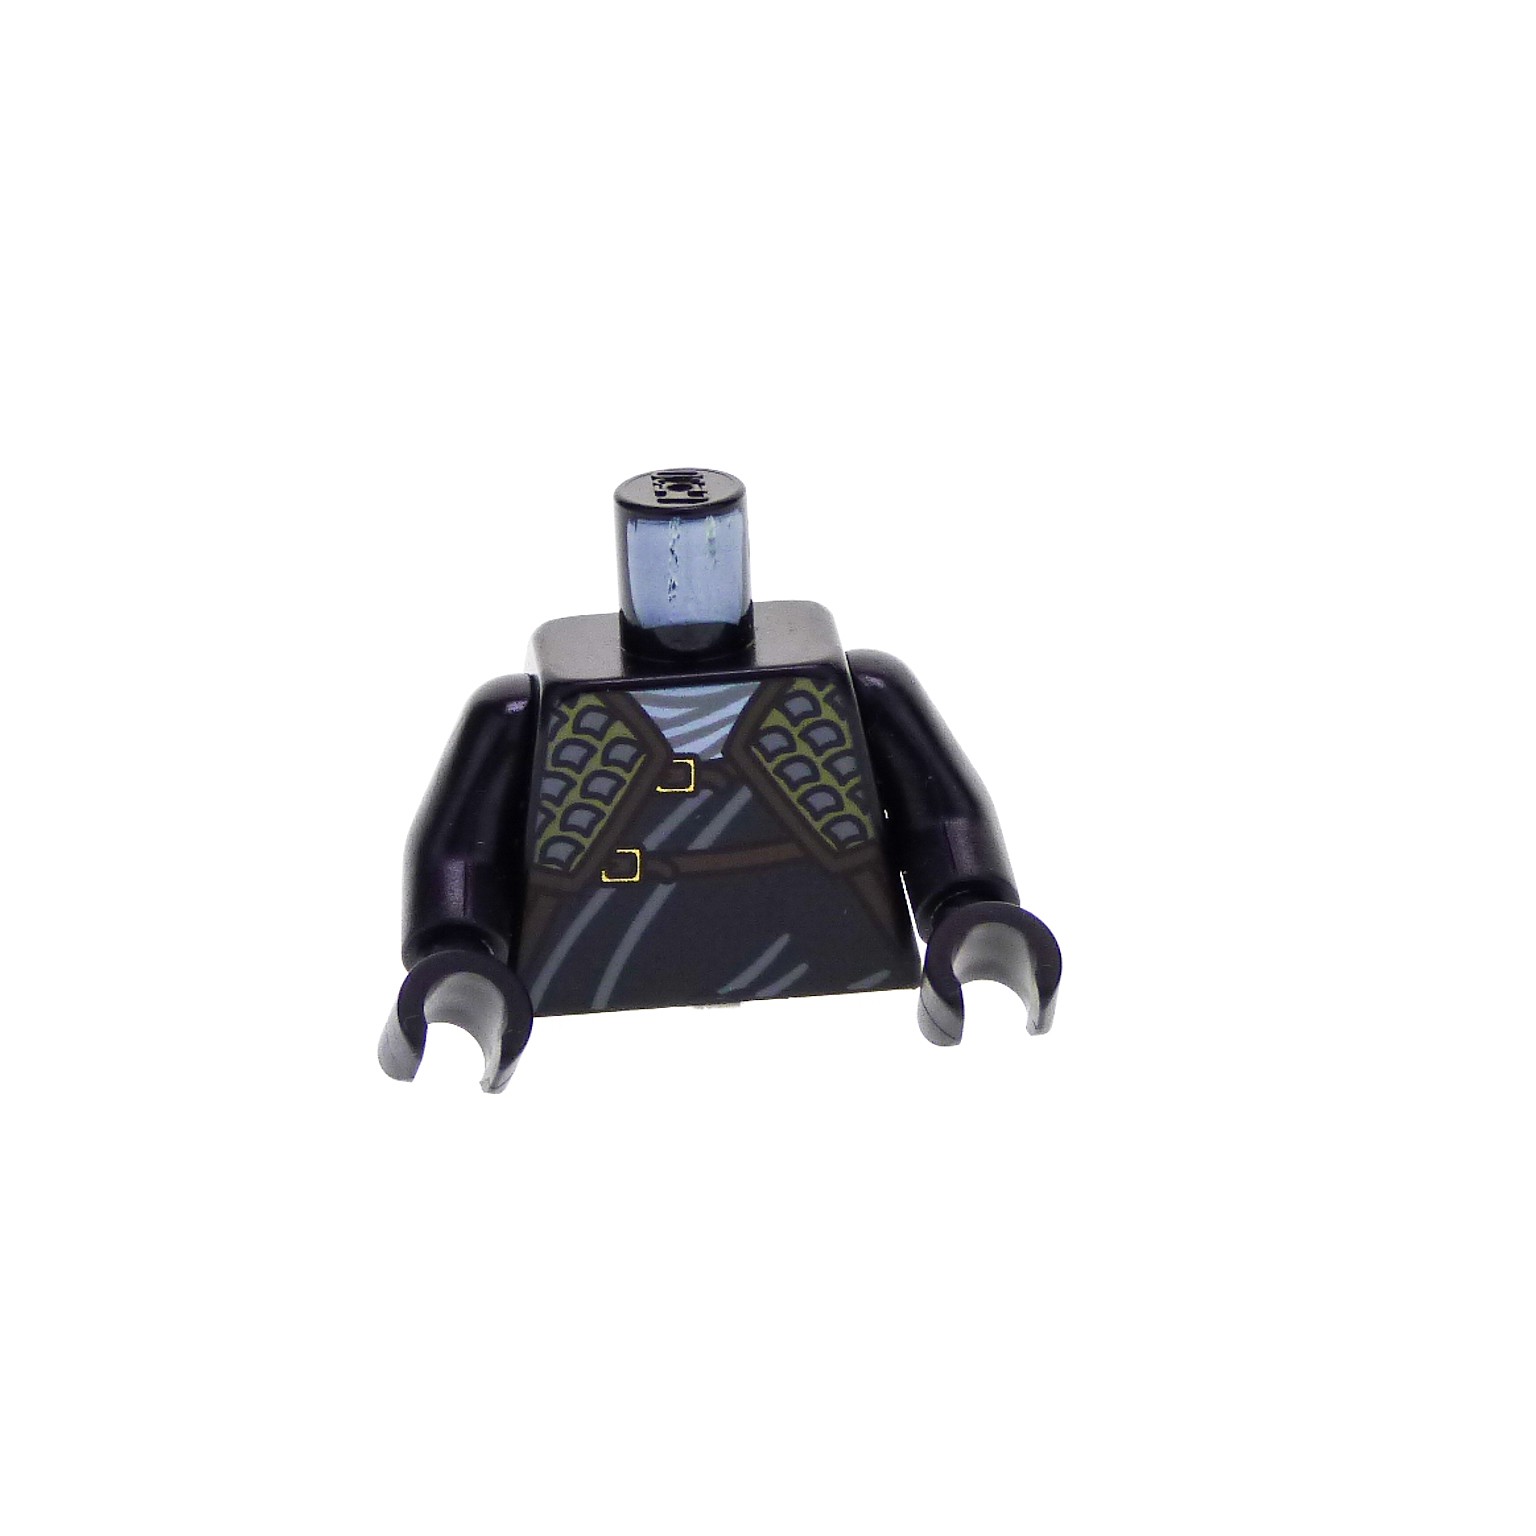 Lego New Black Minifigure Armor with 2 Flaps over Shoulders Piece 